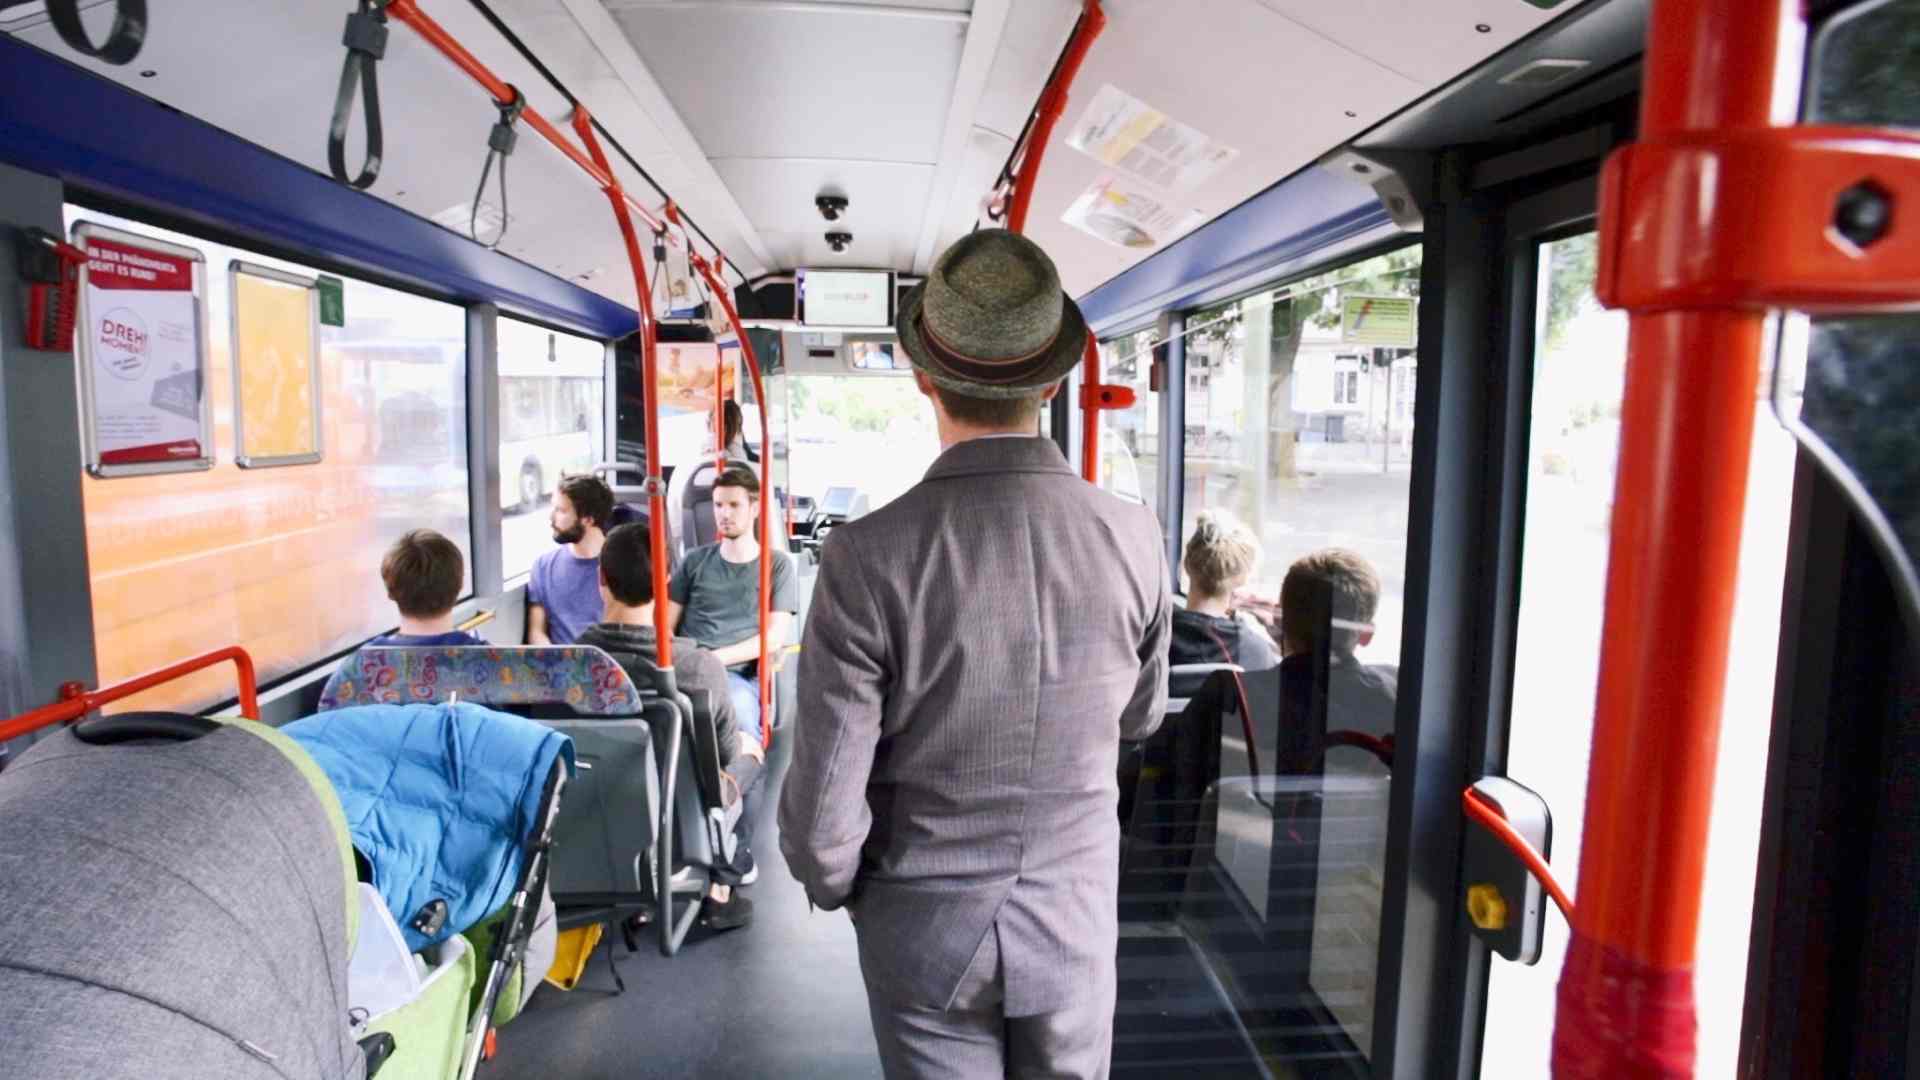 Men with suit and head standing in the bus.